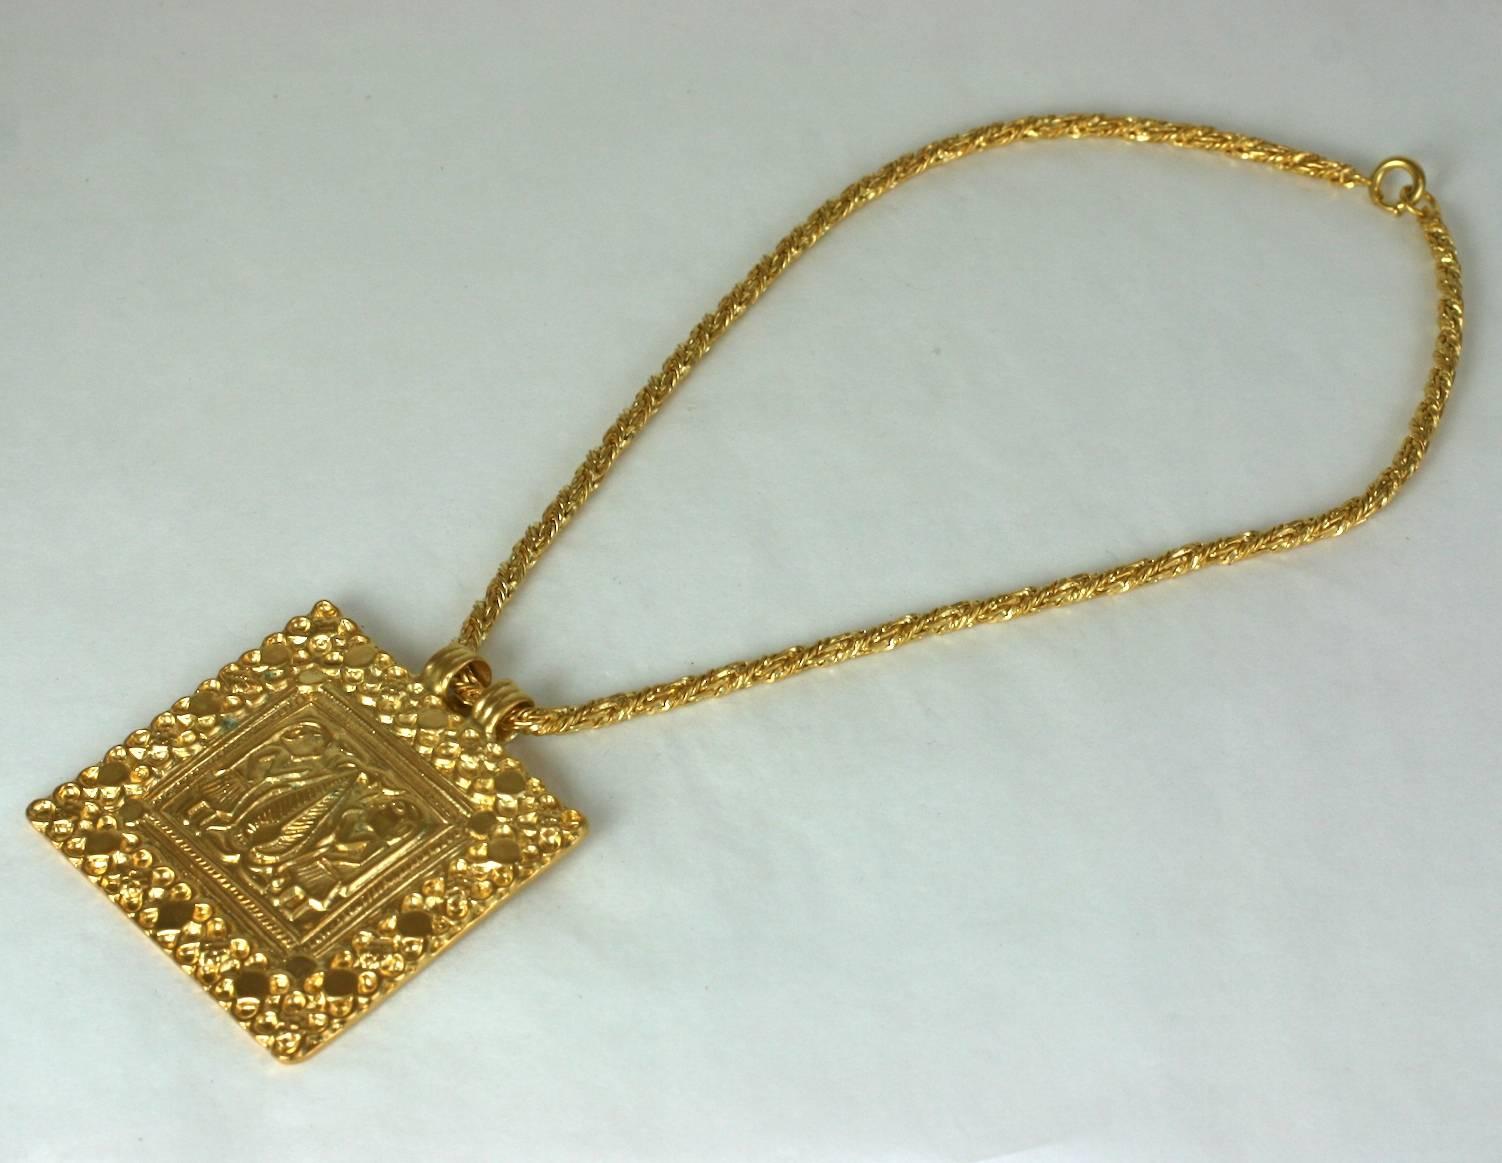  Line Vautrin The Tree Of Life pendant necklace in gilt metal, the model created around 1937 this one realized around 1950. With center motif of a stylized tree flanked by two figures representing Adam and Eve. This pendant is unsigned. 
LINE